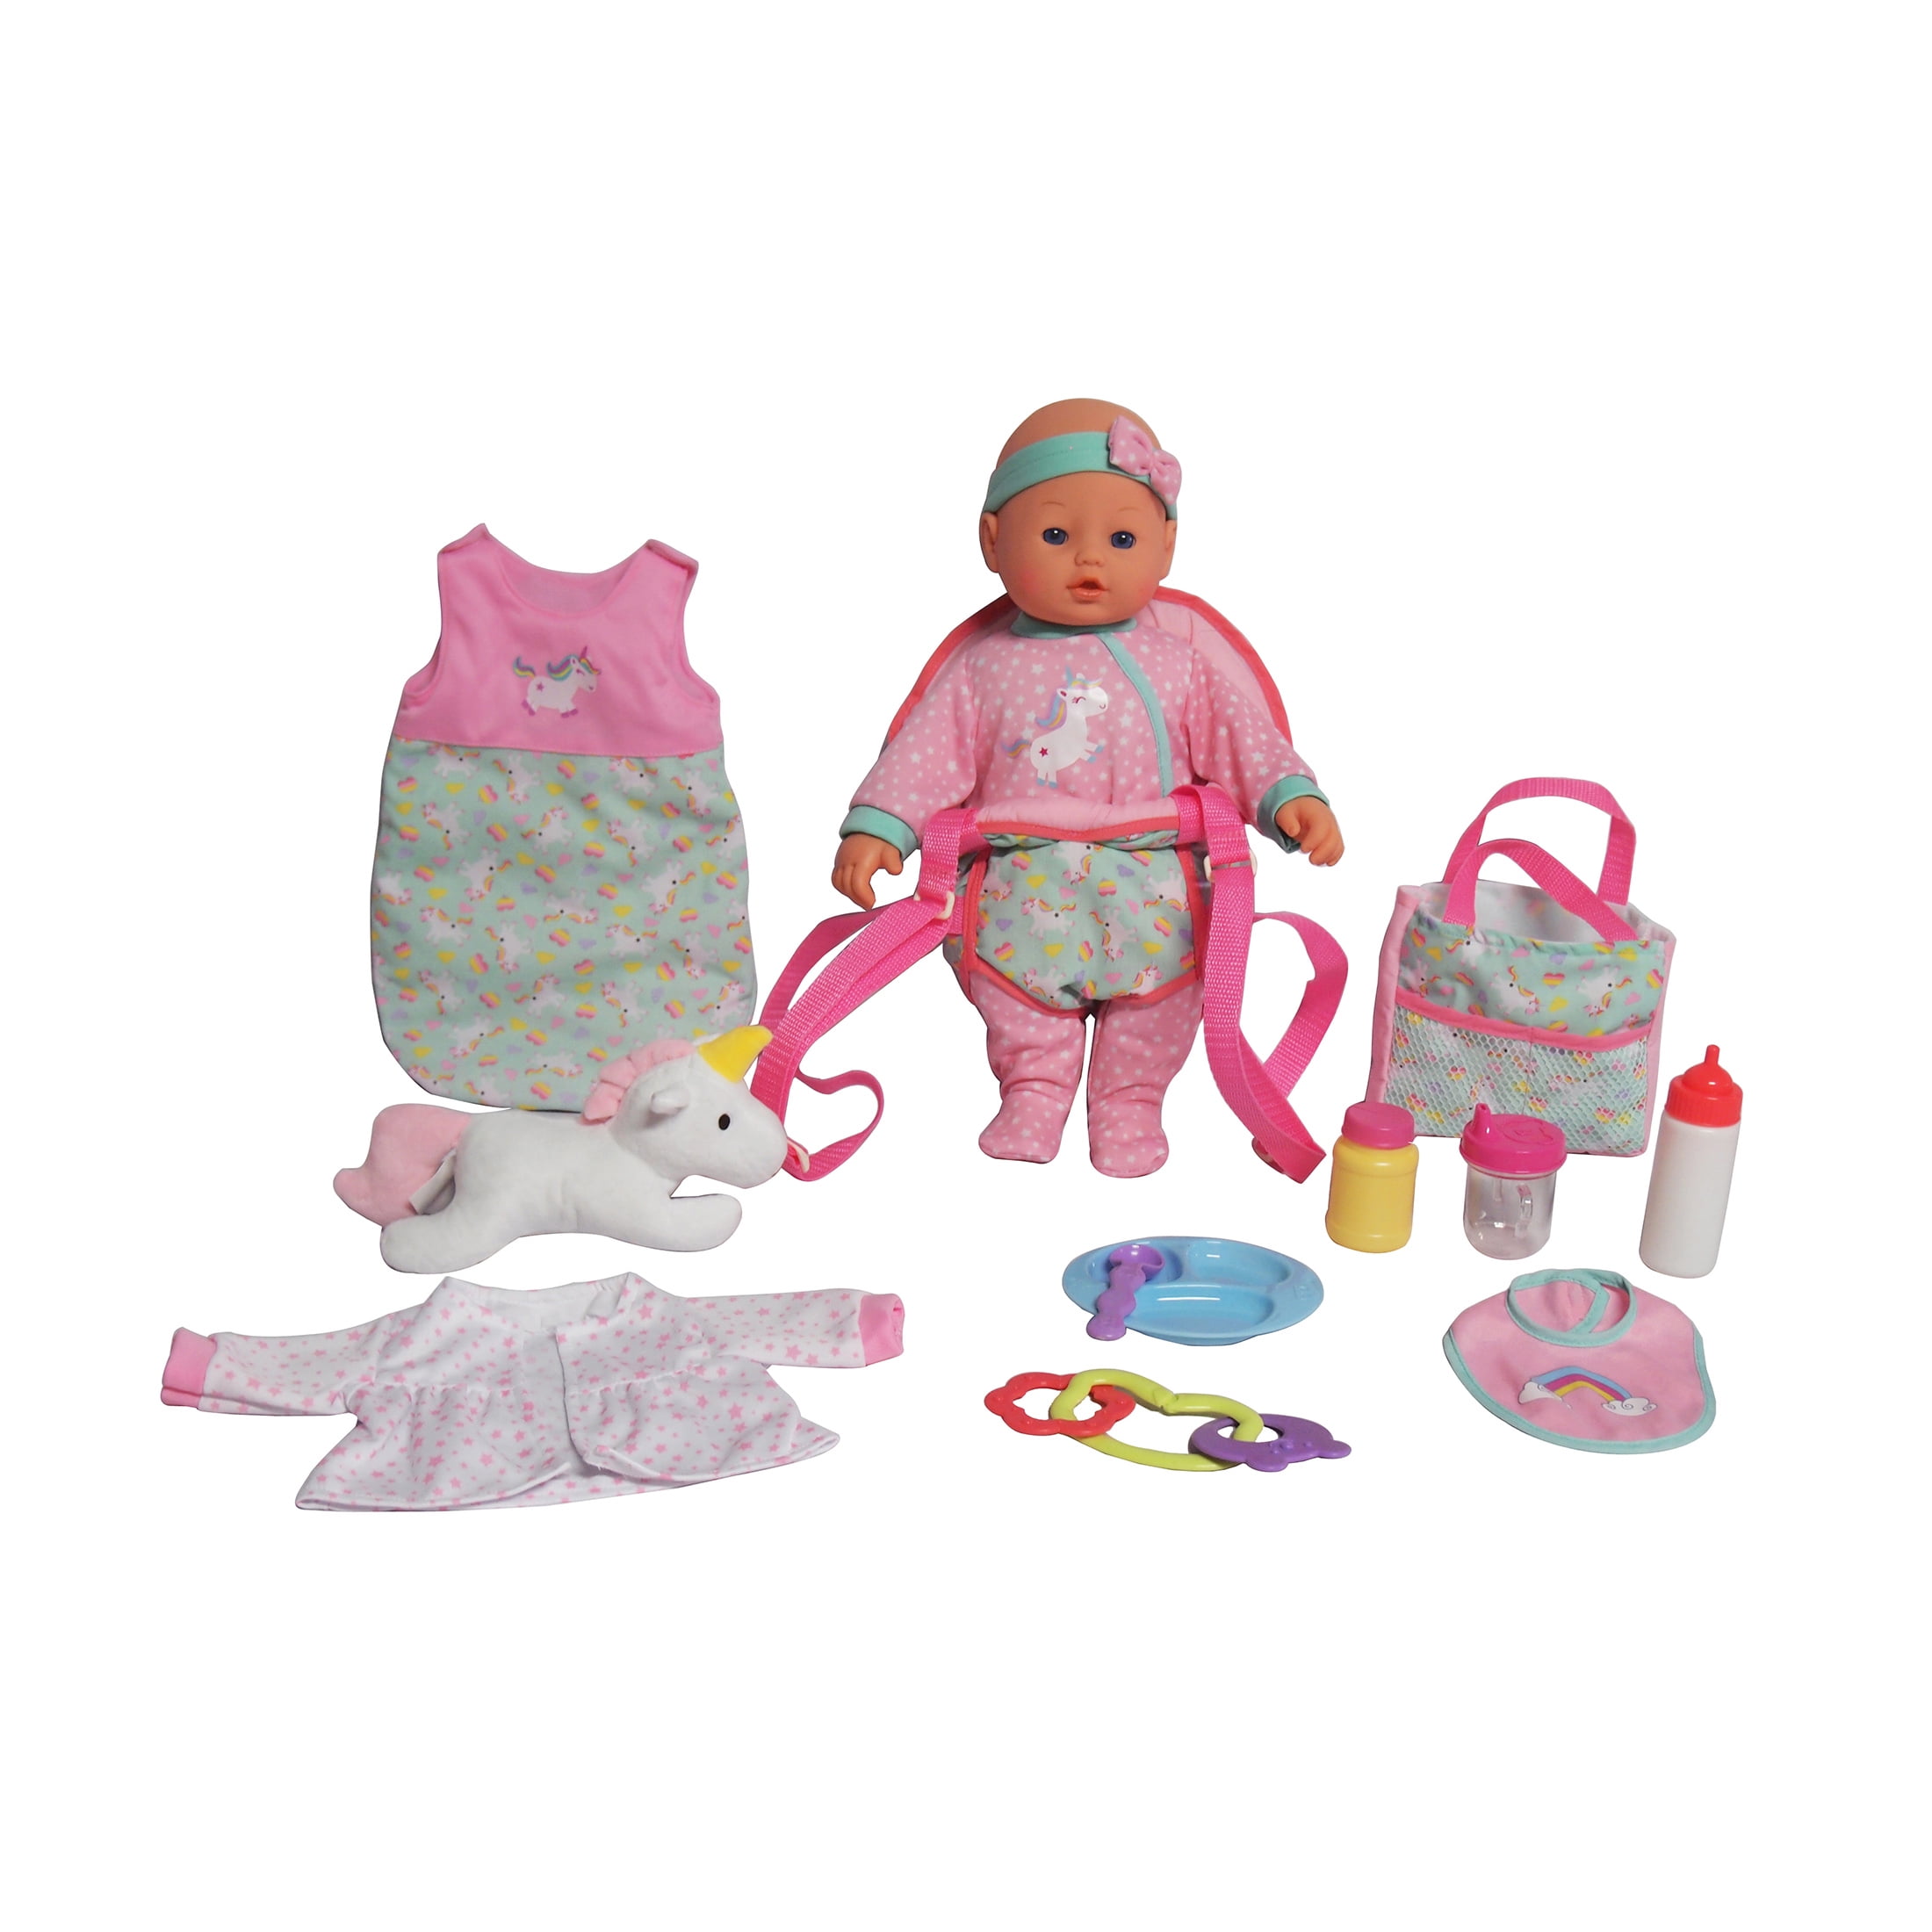 Dream Collection 16 Baby Doll Travelling Set - Pink 